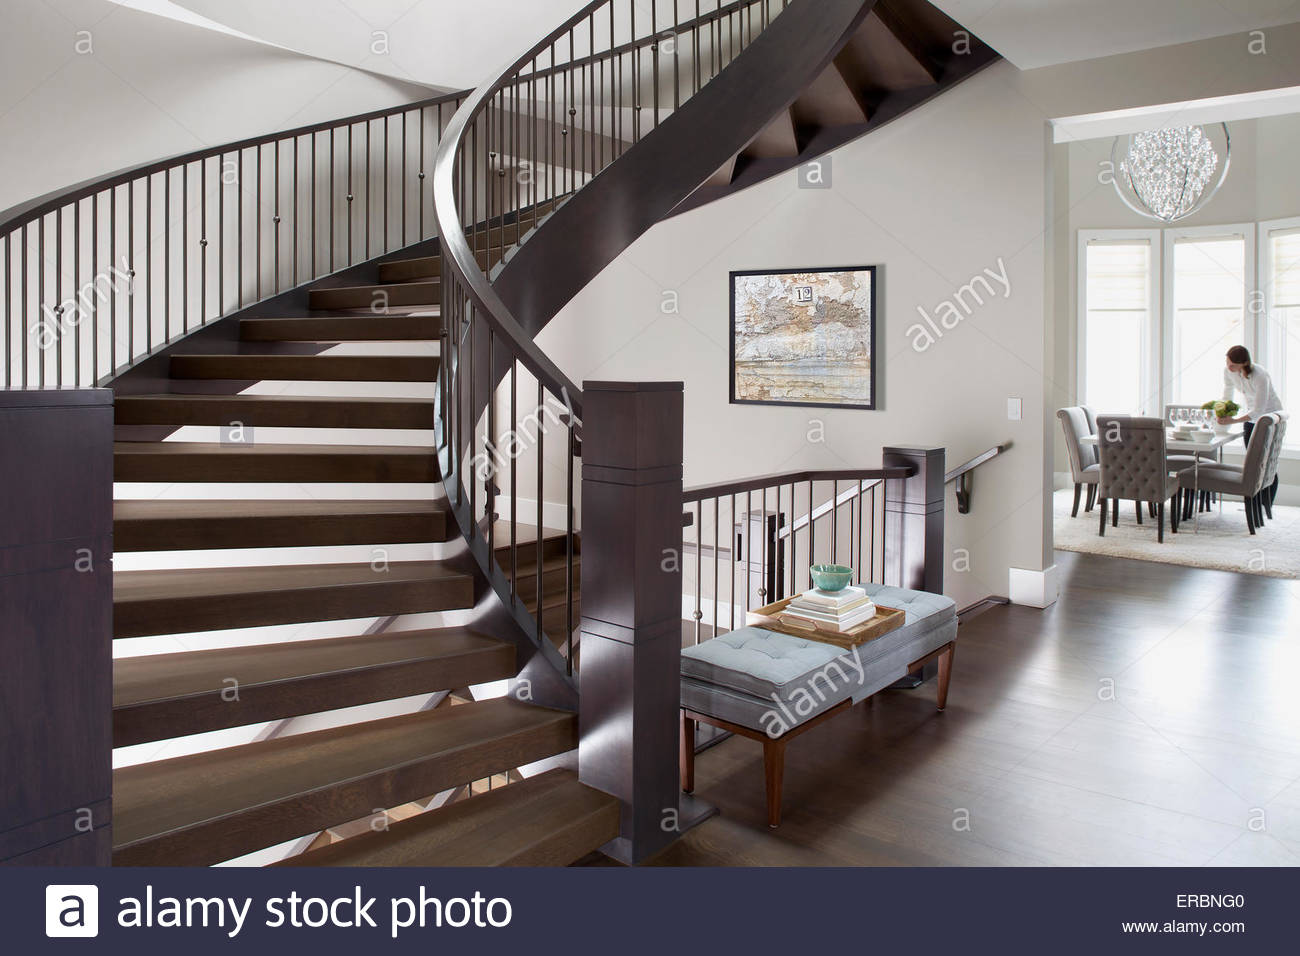 Spiral staircase in elegant home Stock Photo